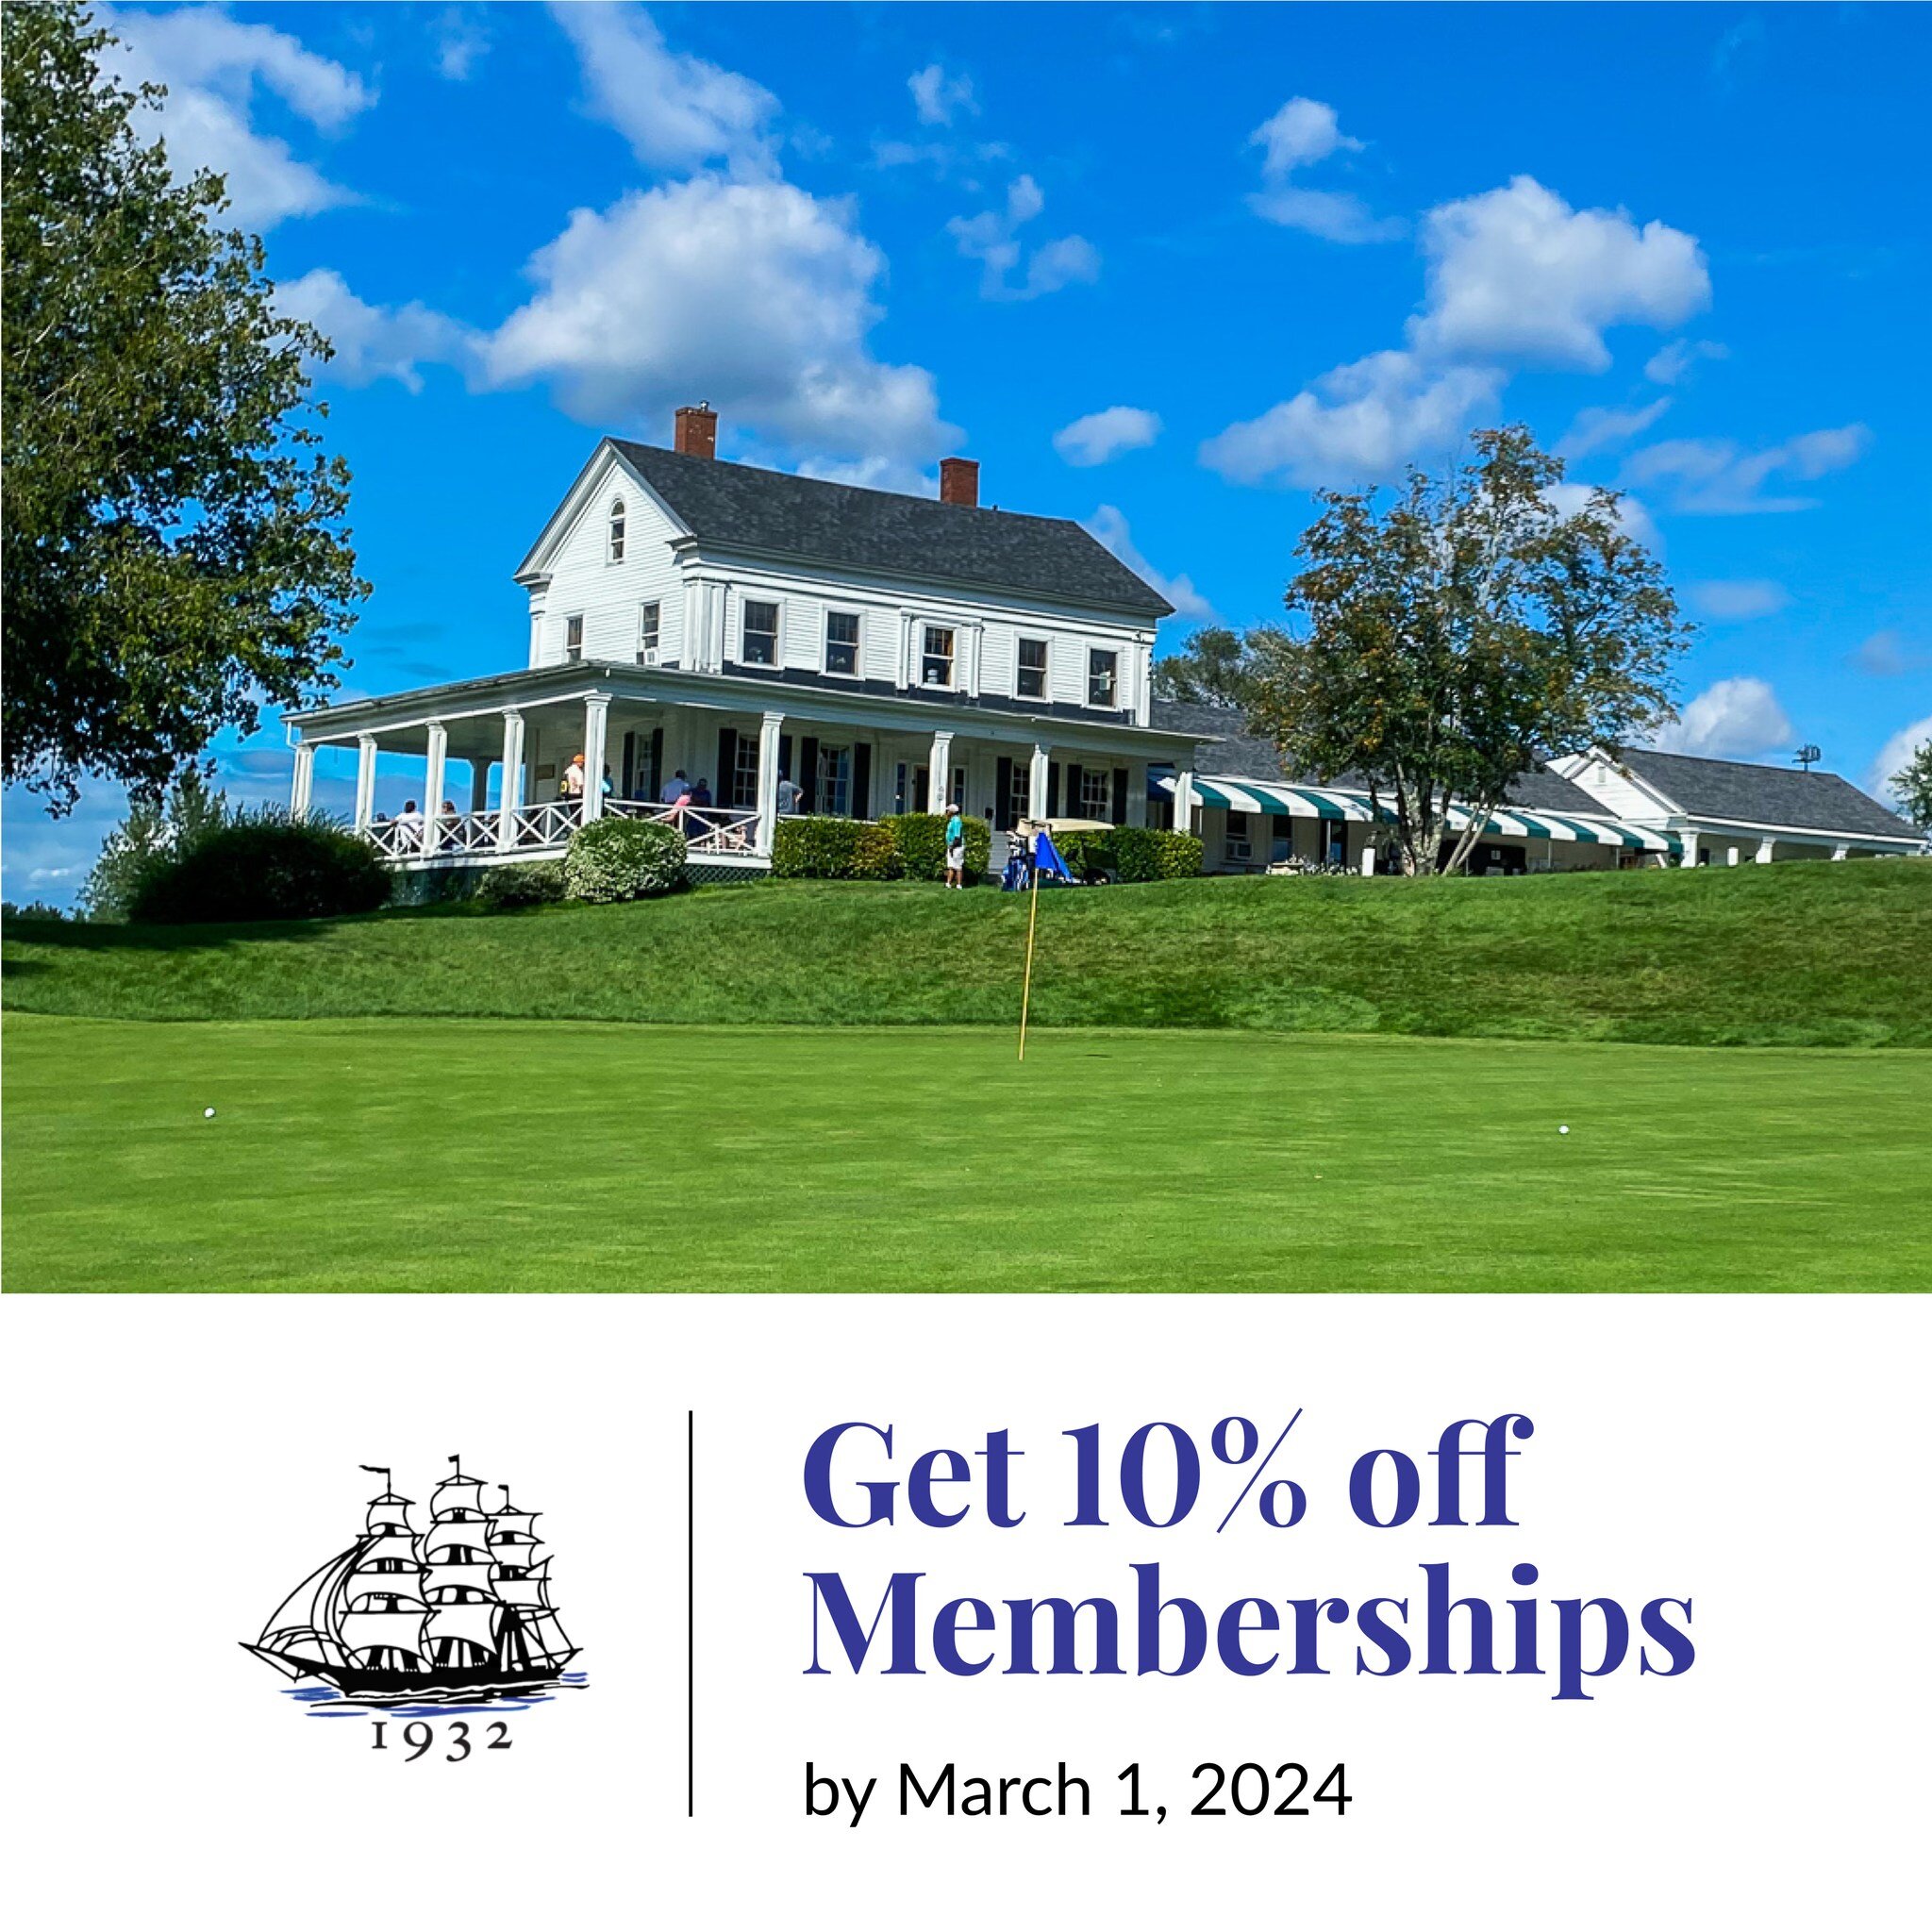 For those eager to join us in 2024, we're offering a 10% discount on memberships purchased by March 1, 2024. We're introducing an exclusive range of memberships tailored for the full 18-hole experience, including some novel categories, from Young Adu